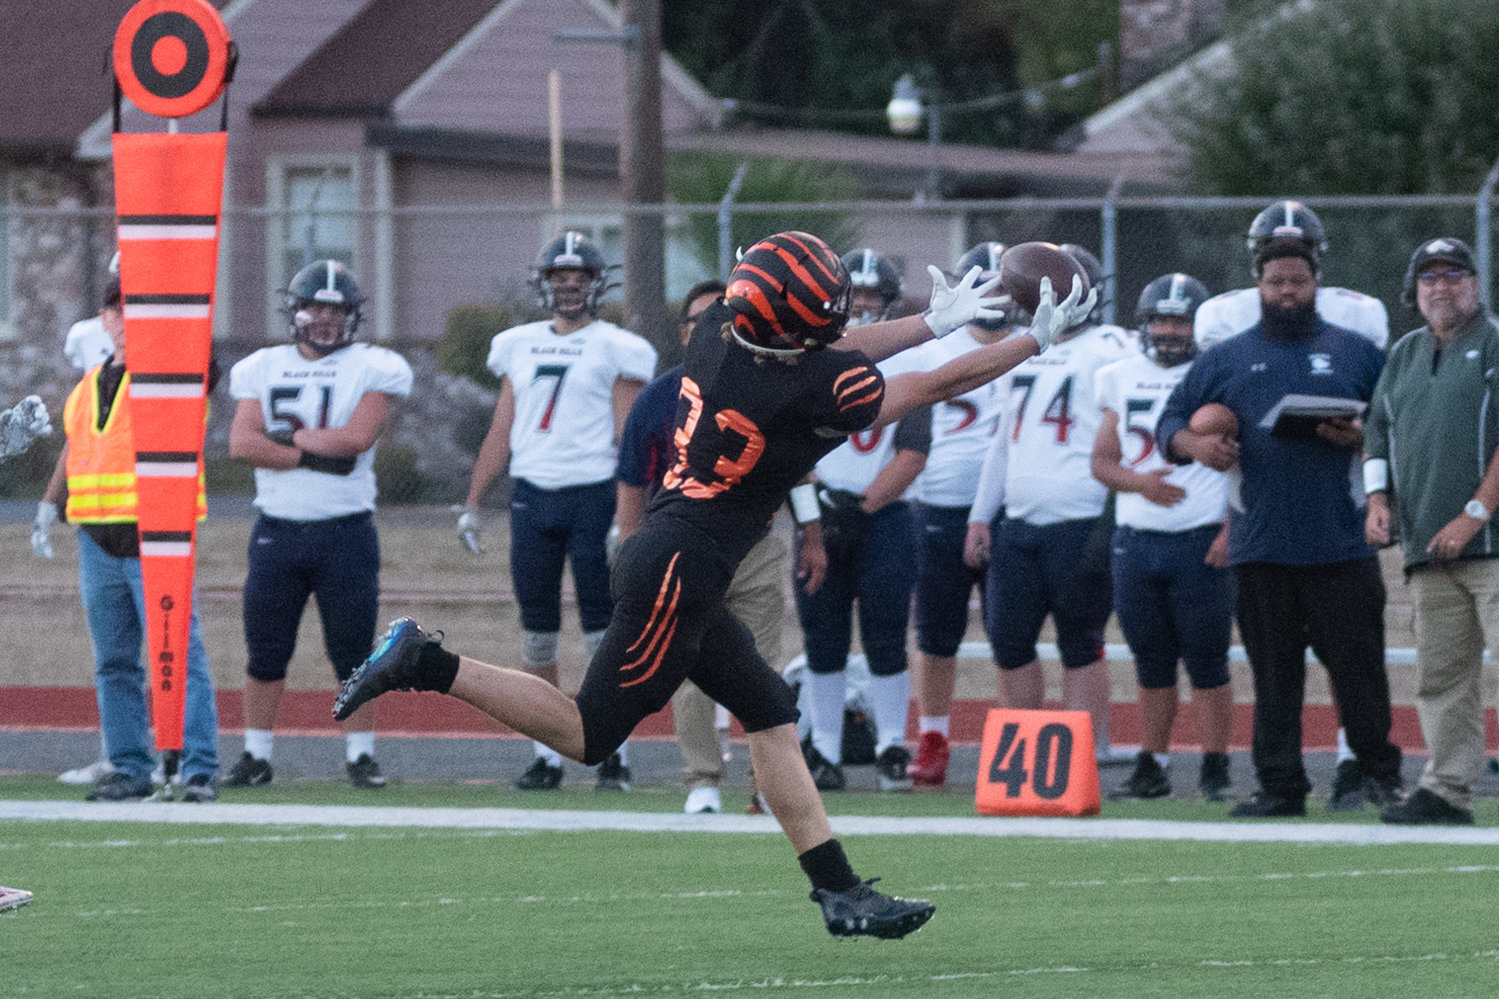 Centralia receiver Blake Seymour comes up with a incredible catch in the Tigers loss to Black Hills Friday night.